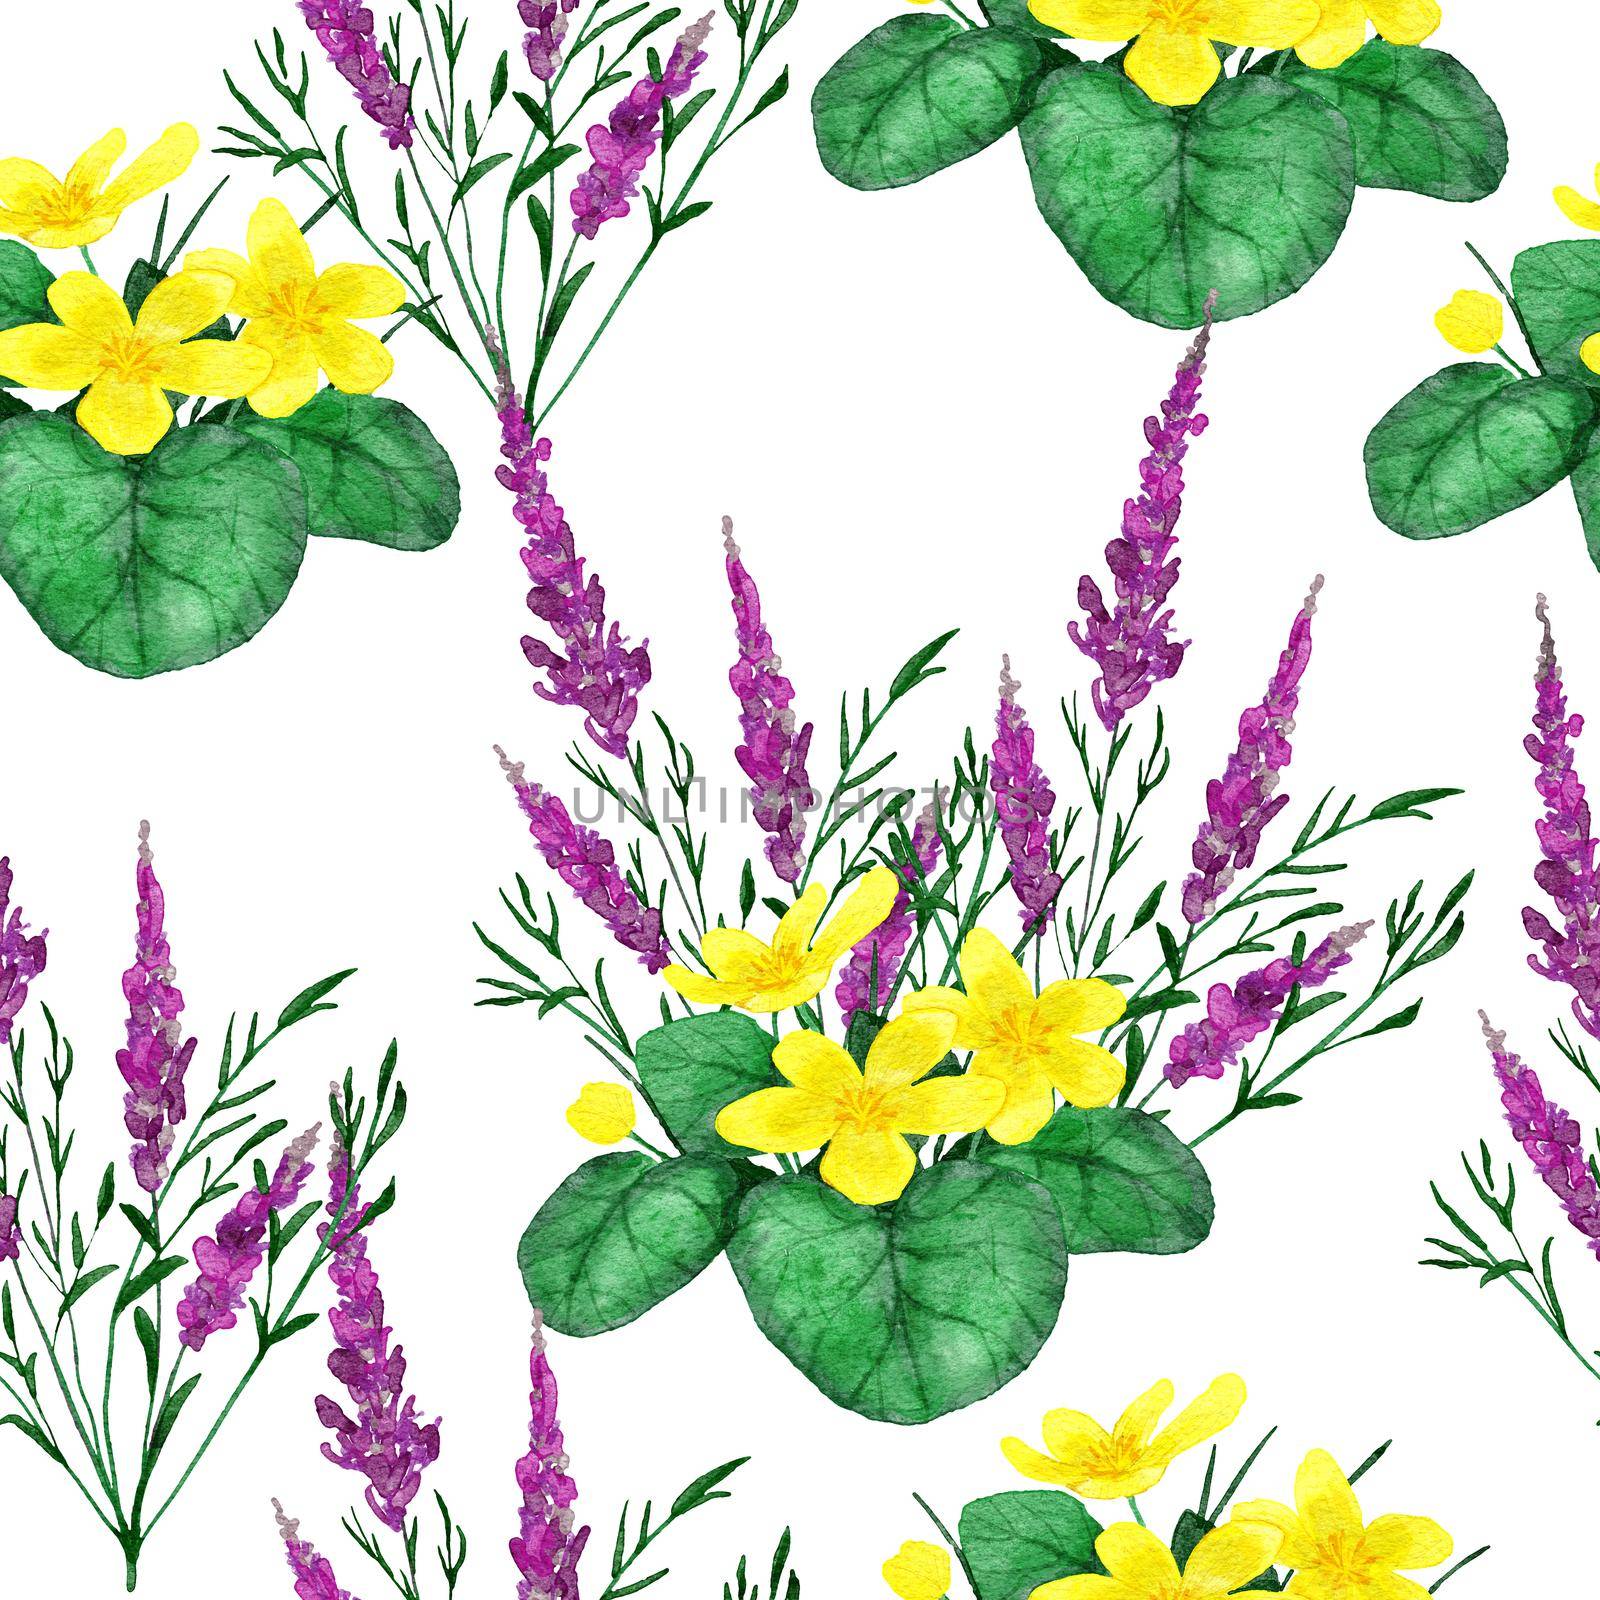 Hand drawn watercolor seamless pattern with river wild flowers, floral wildlife natural background with purple fireweed yellow trollius green leaf leaves meadow design. by Lagmar